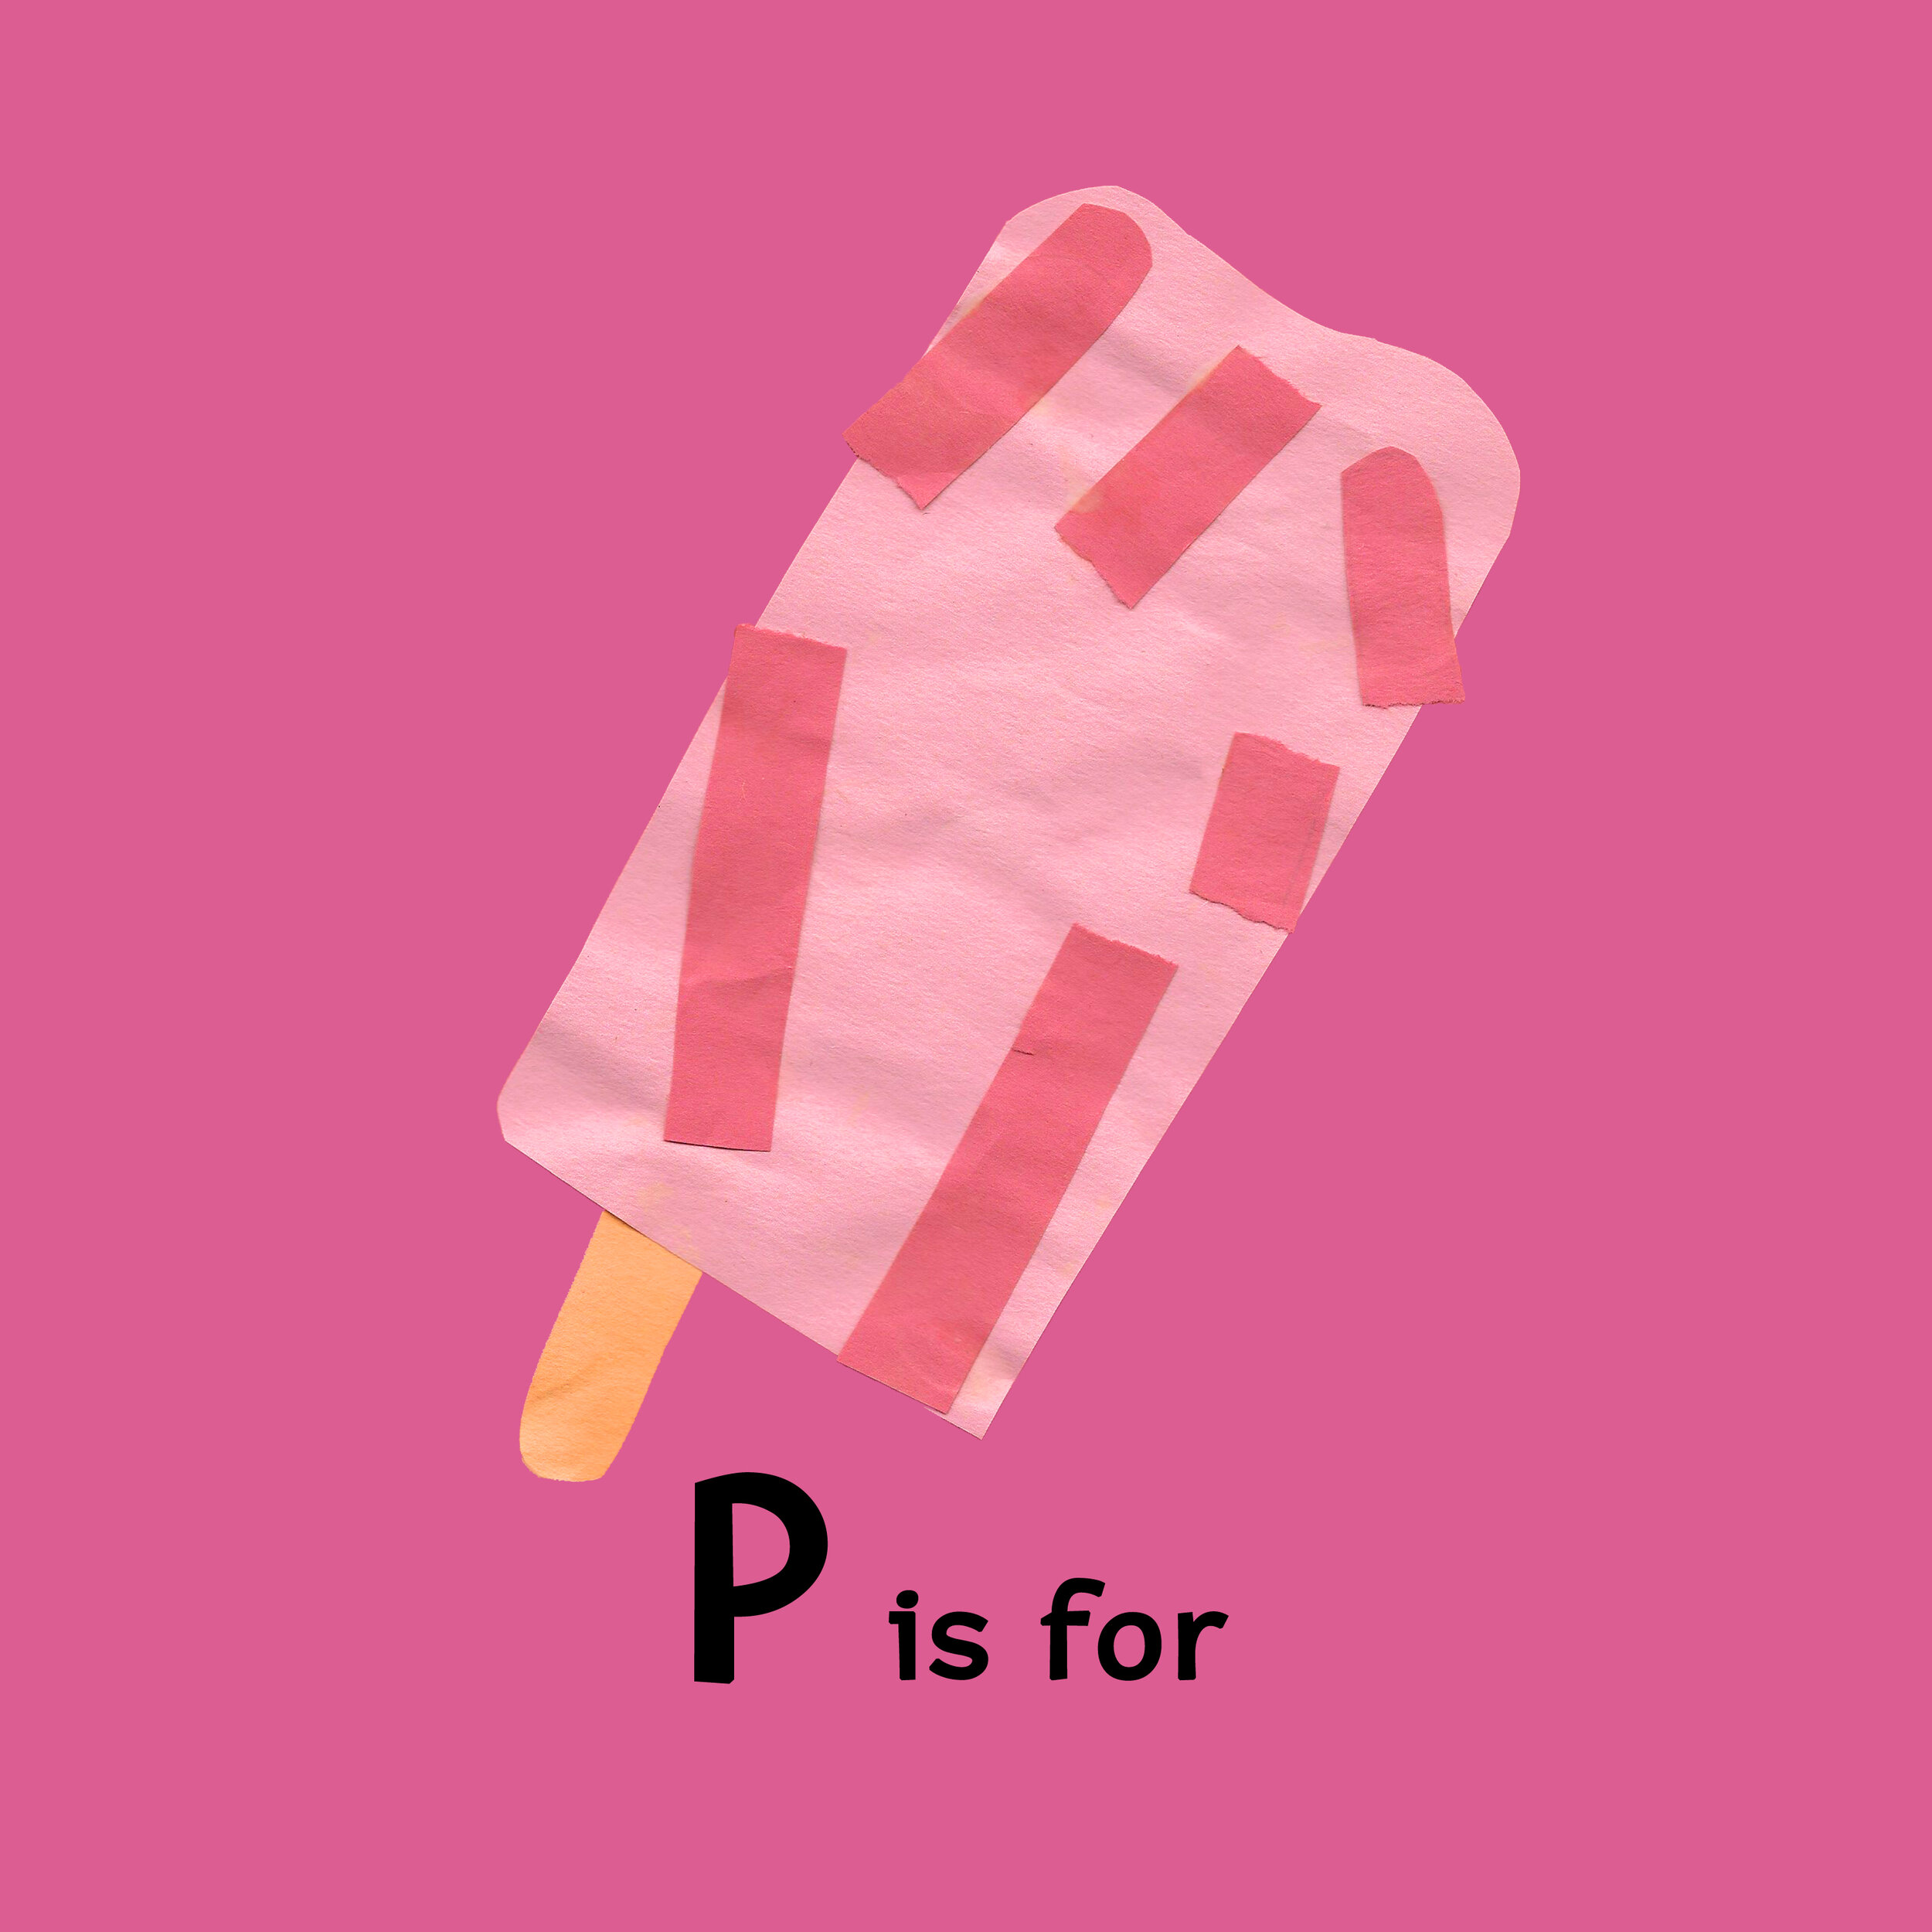 P is for.jpg